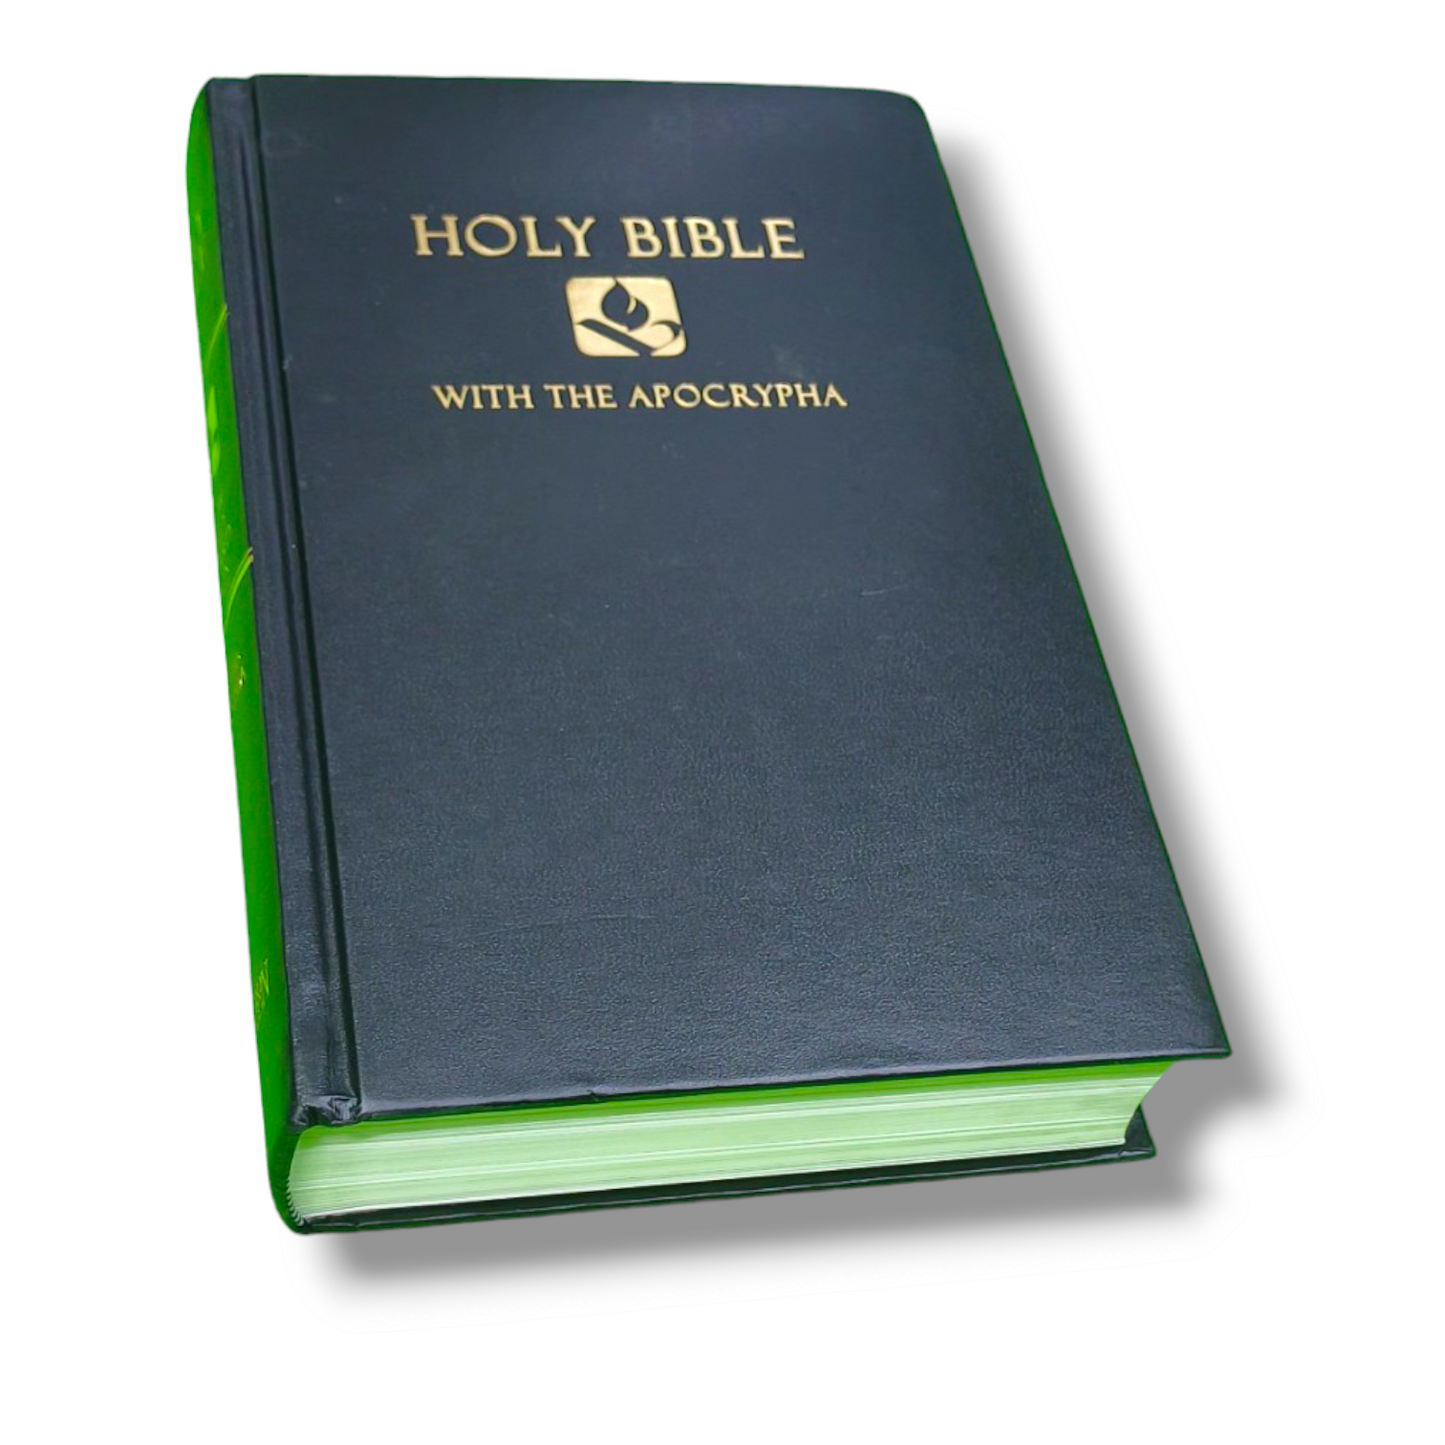 Holy Bible | New Edition | Black Hard Bound | With The Apocrypha | English Bible